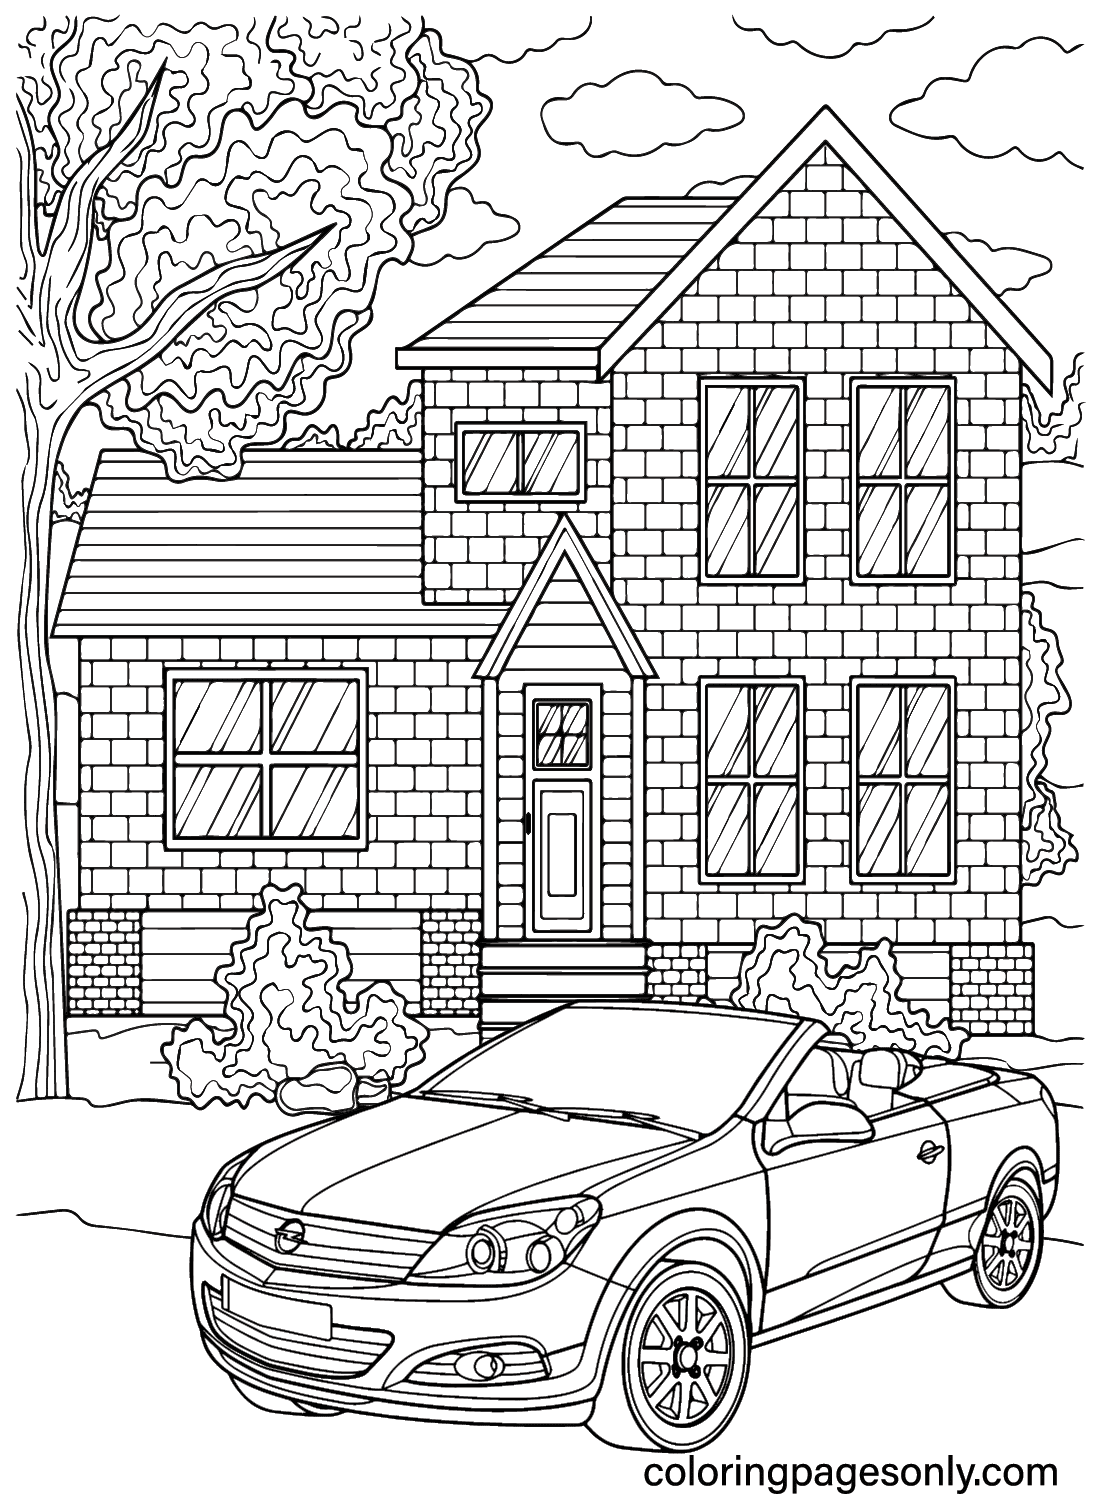 Images Opel Coloring Page from Opel